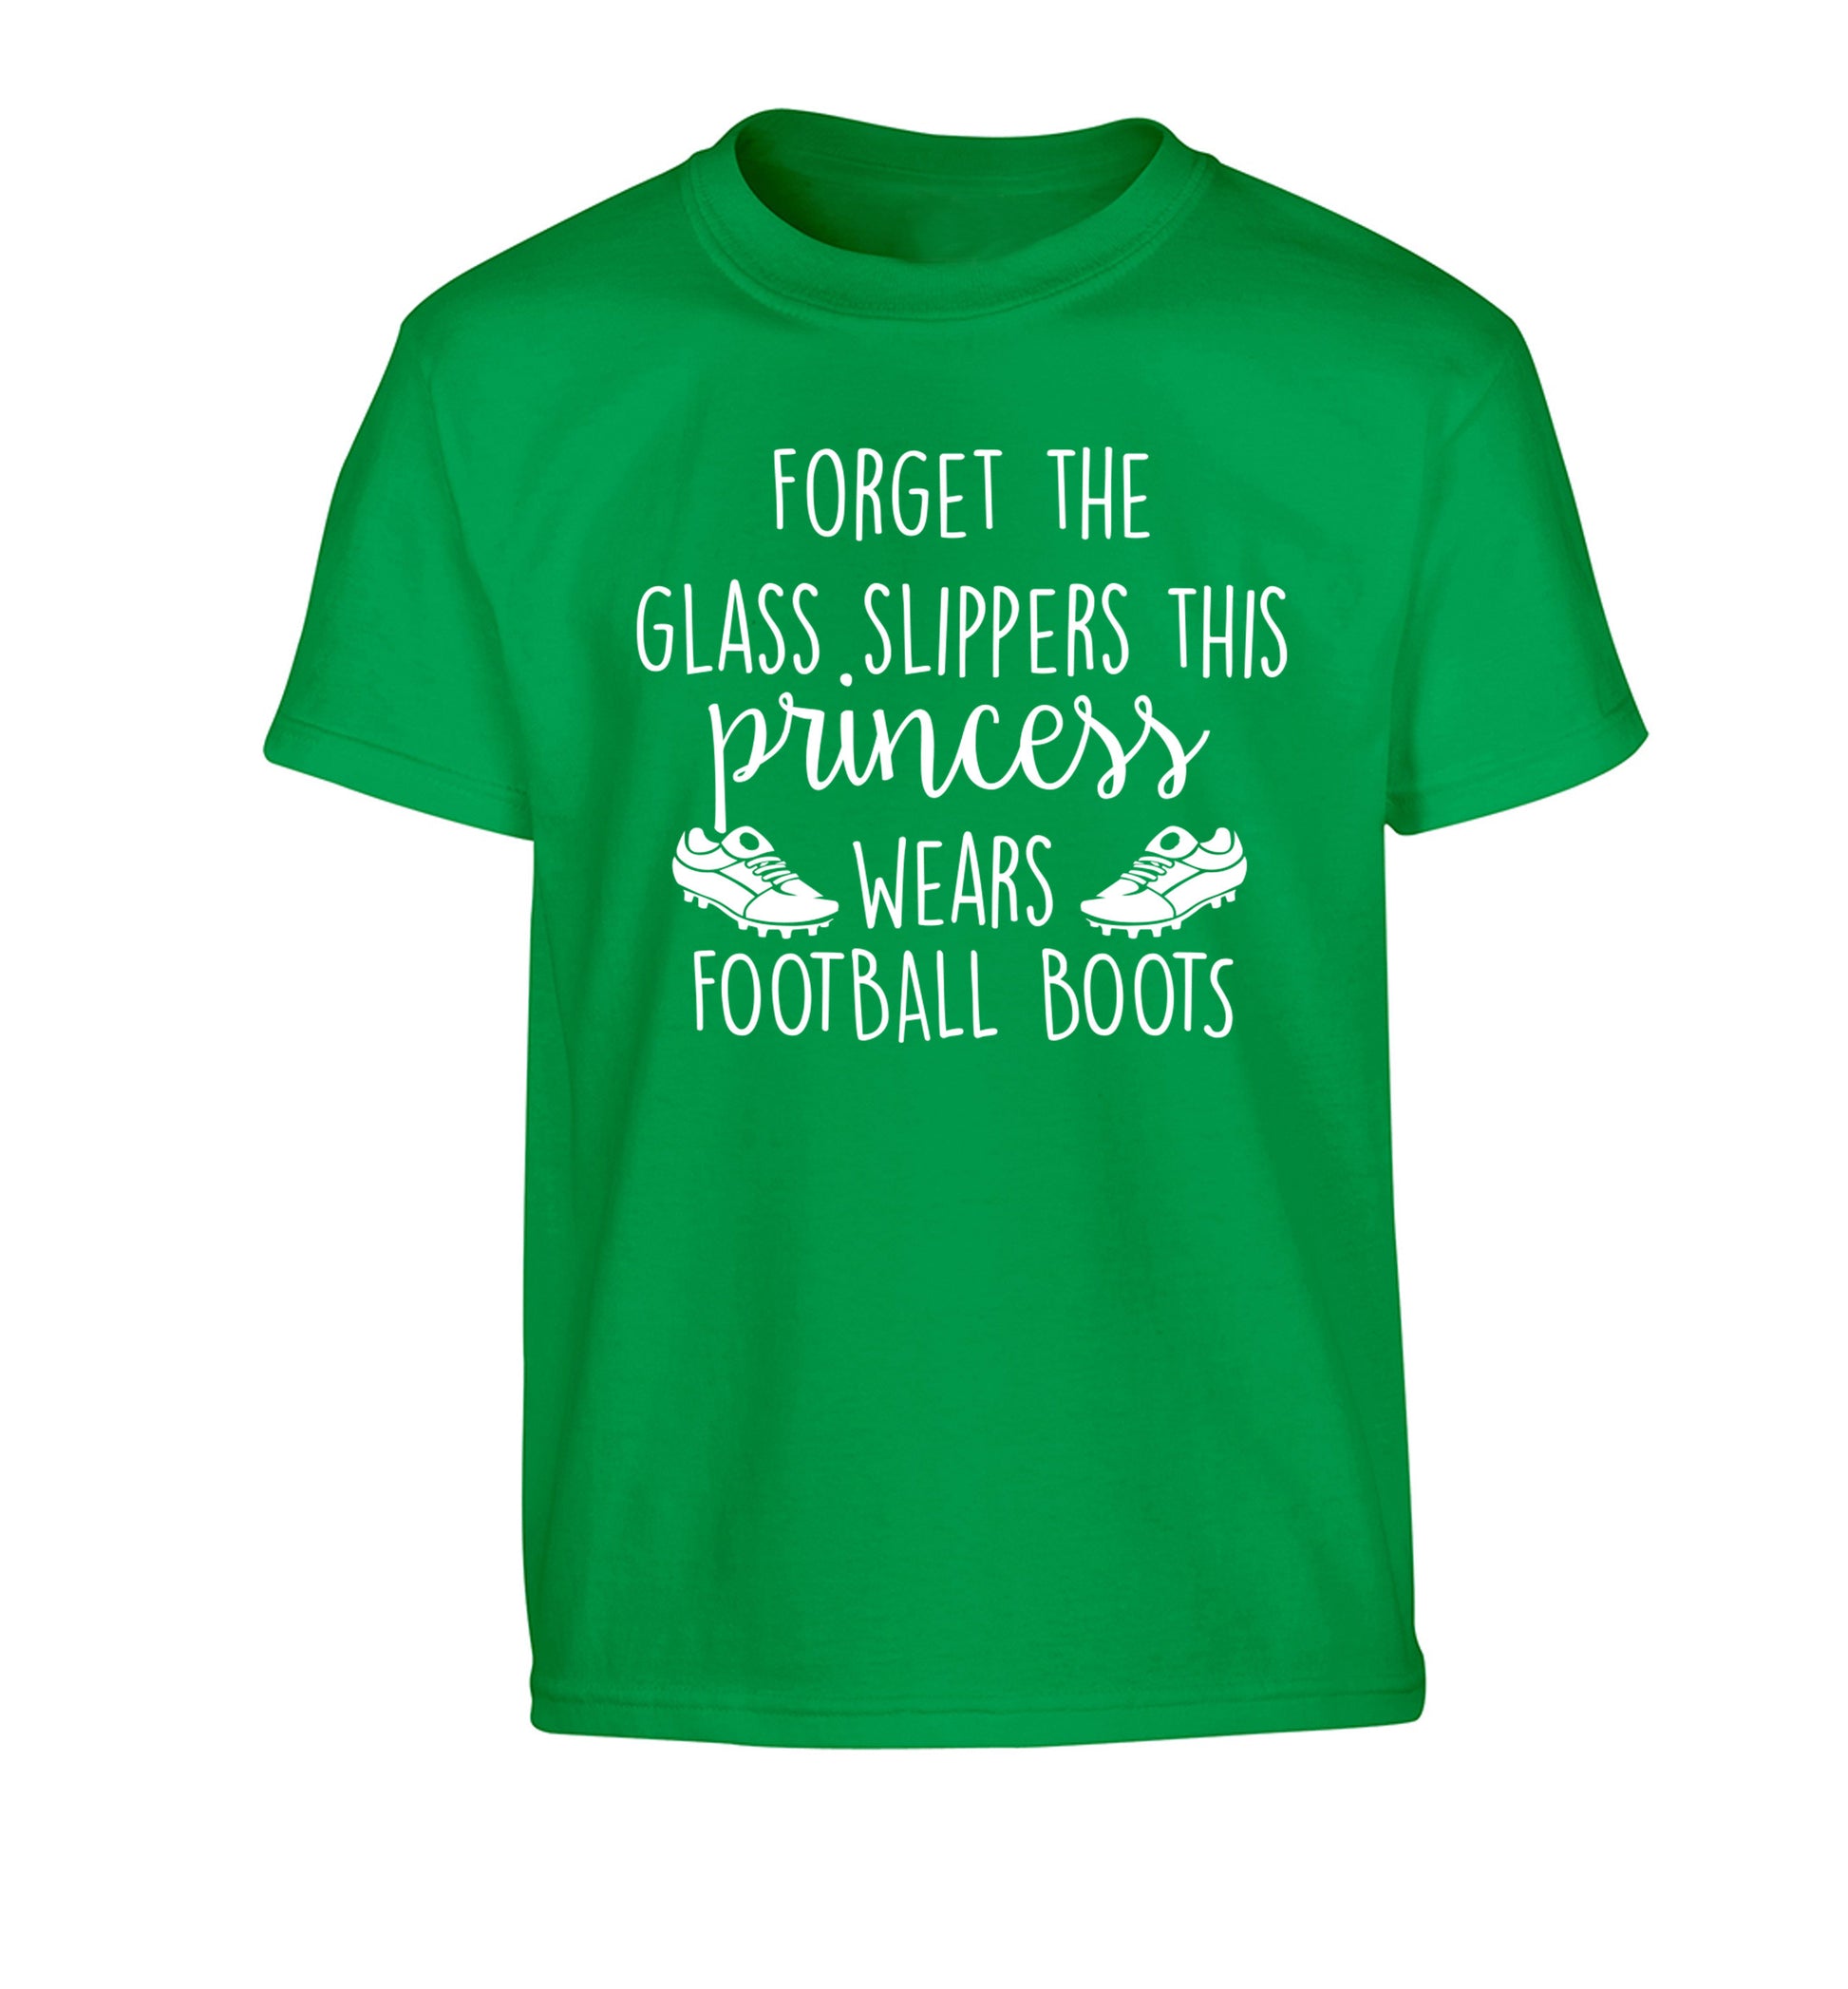 Forget the glass slippers this princess wears football boots Children's green Tshirt 12-14 Years